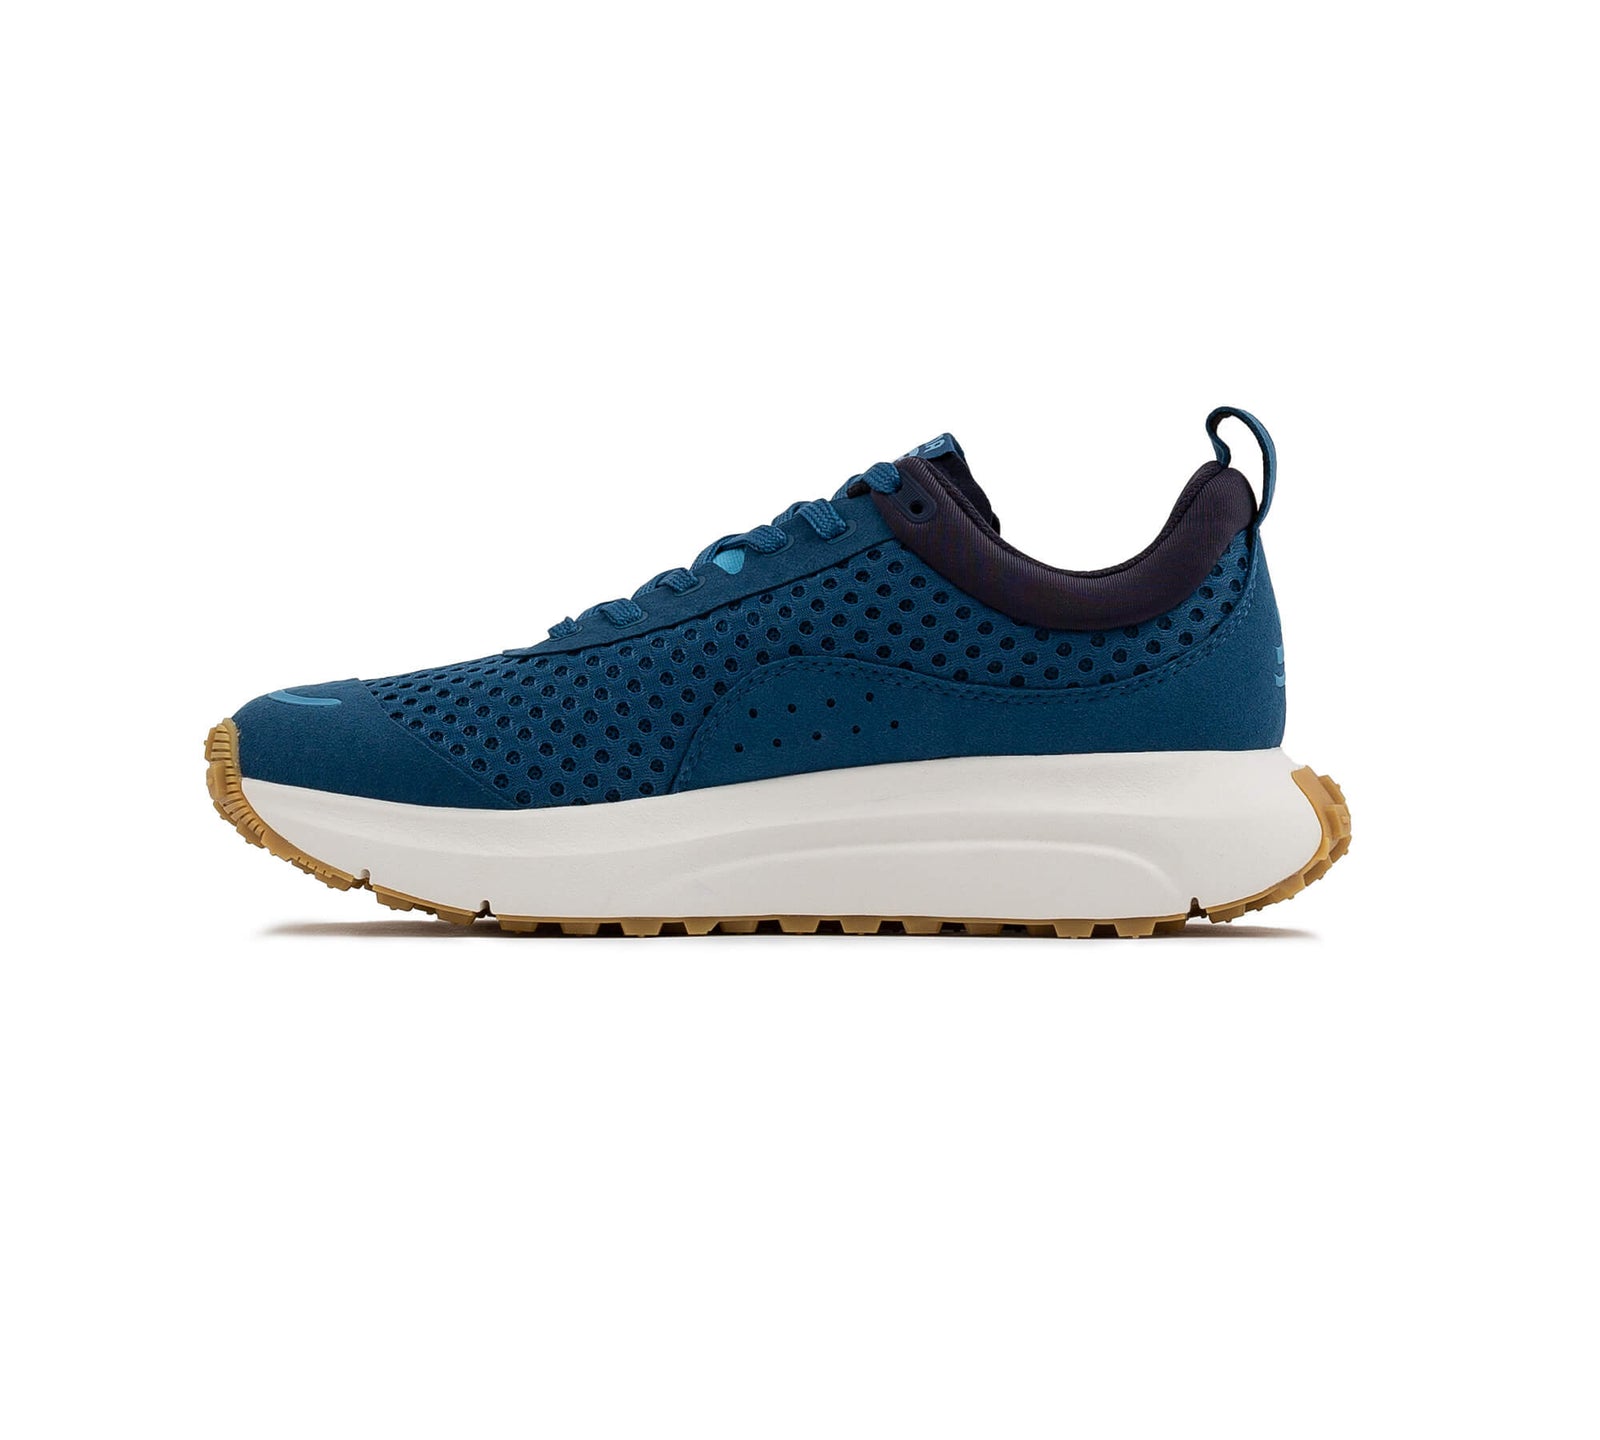 Interior side view of the right Everywhere Hilma Running Shoe in Stellar Blue